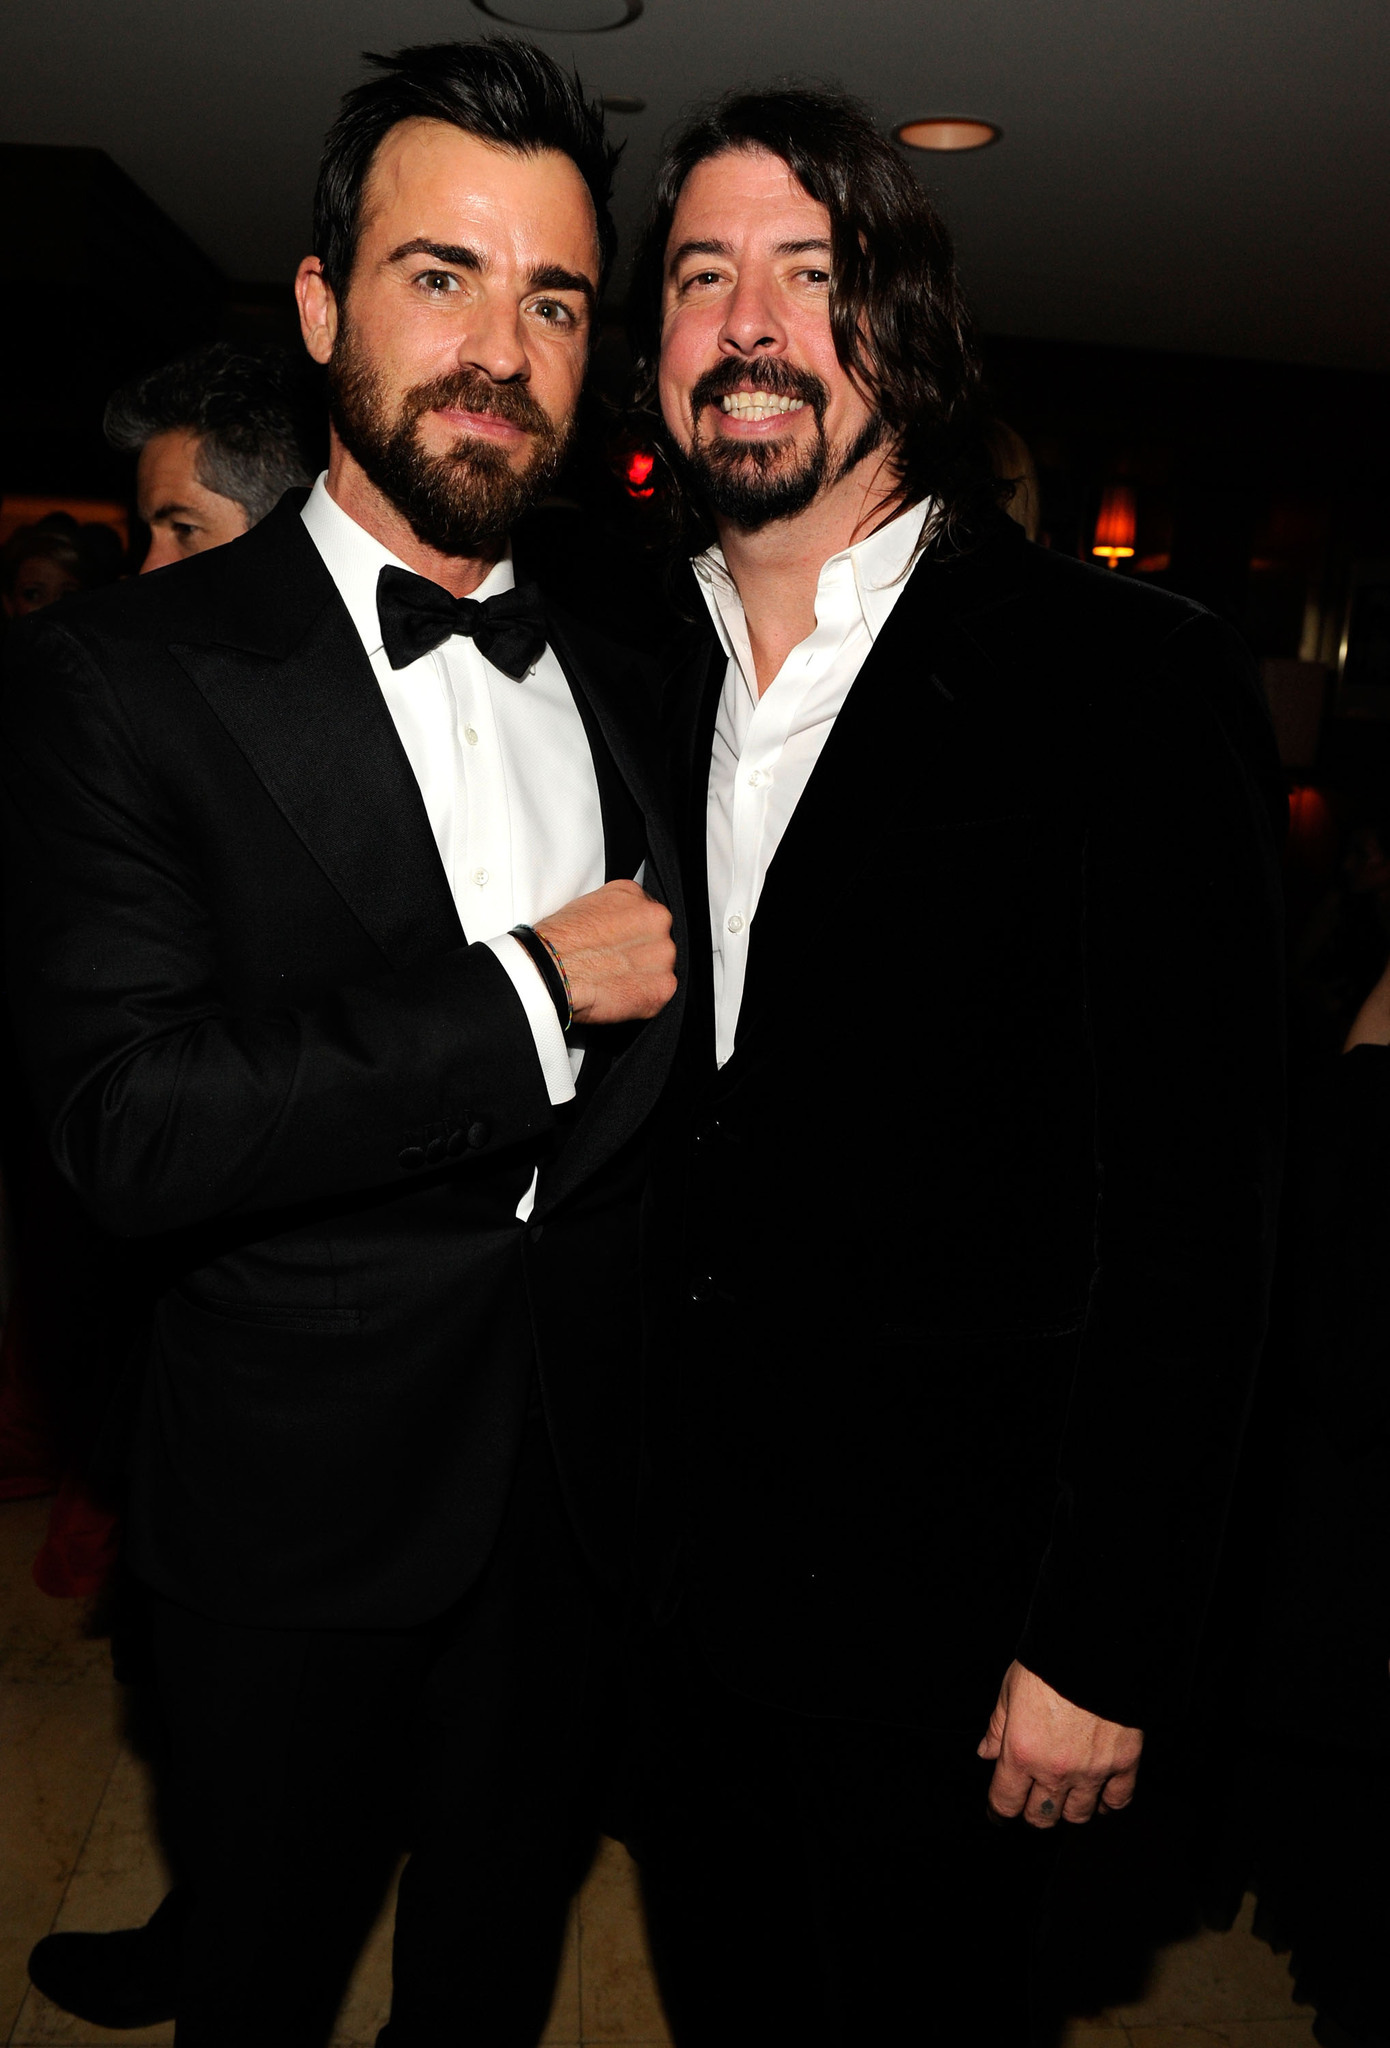 Dave Grohl and Justin Theroux